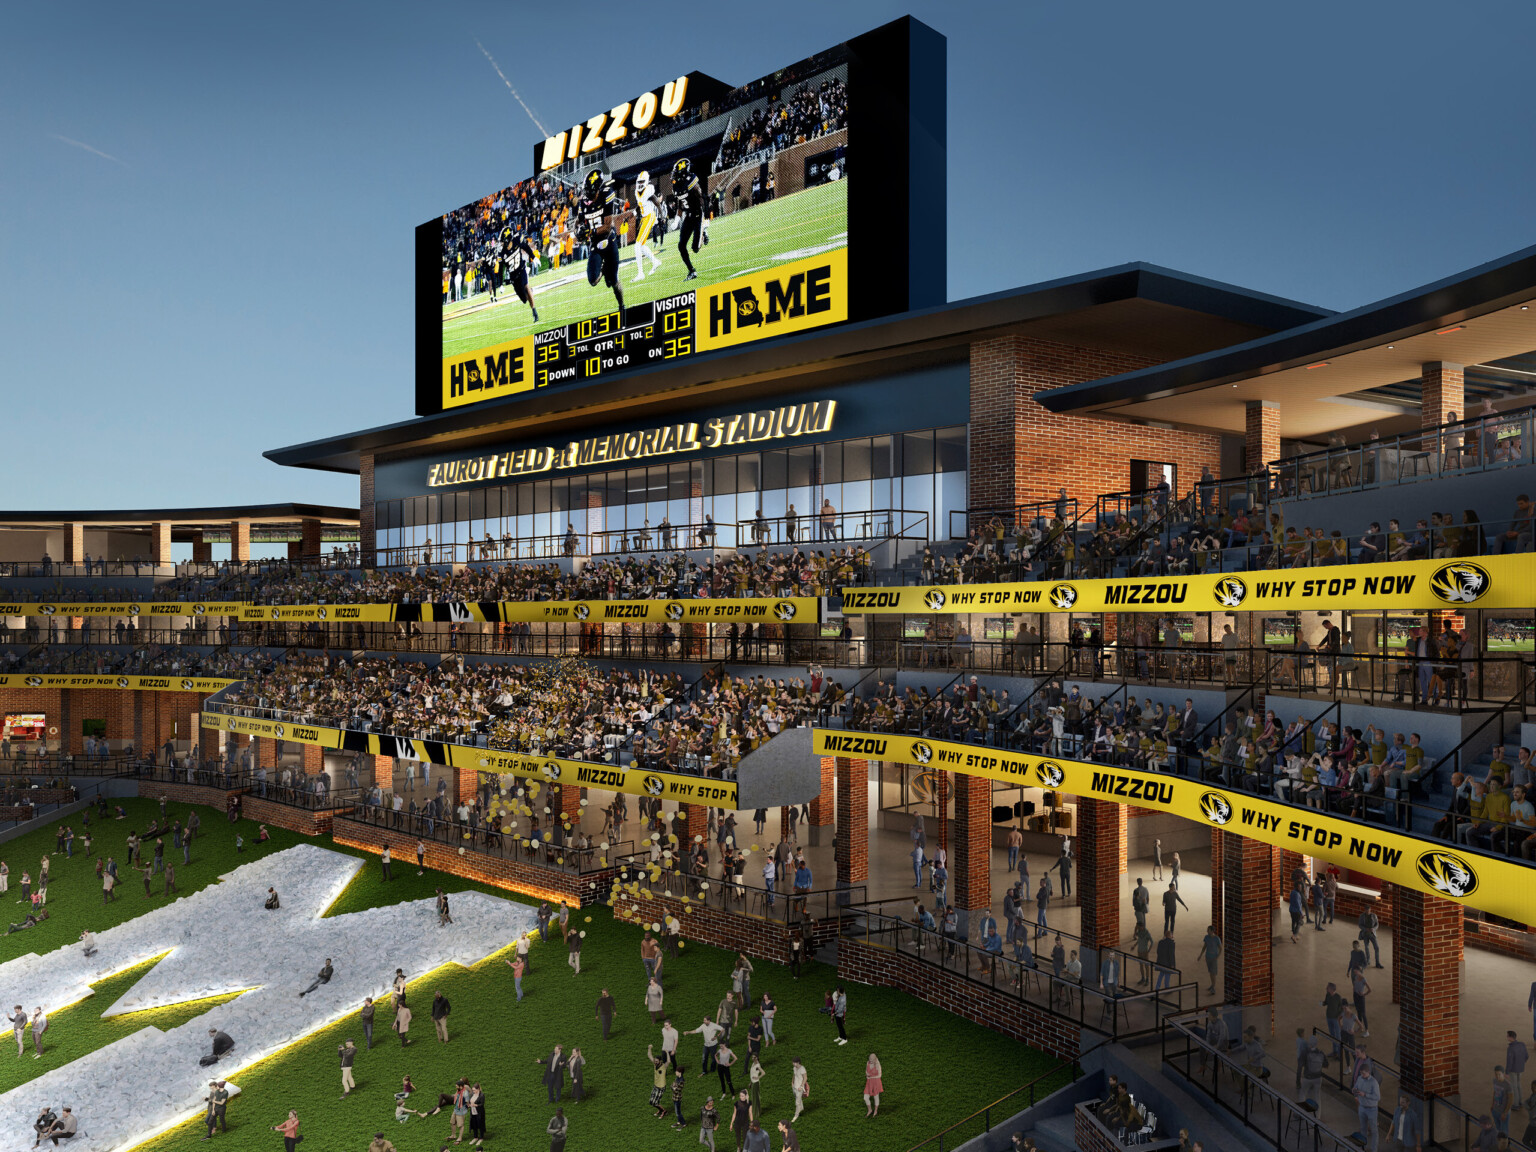 Large jumbotron score board over box and stadium seating at north end of Mizzou Memorial Stadium, grass seating with white M logo